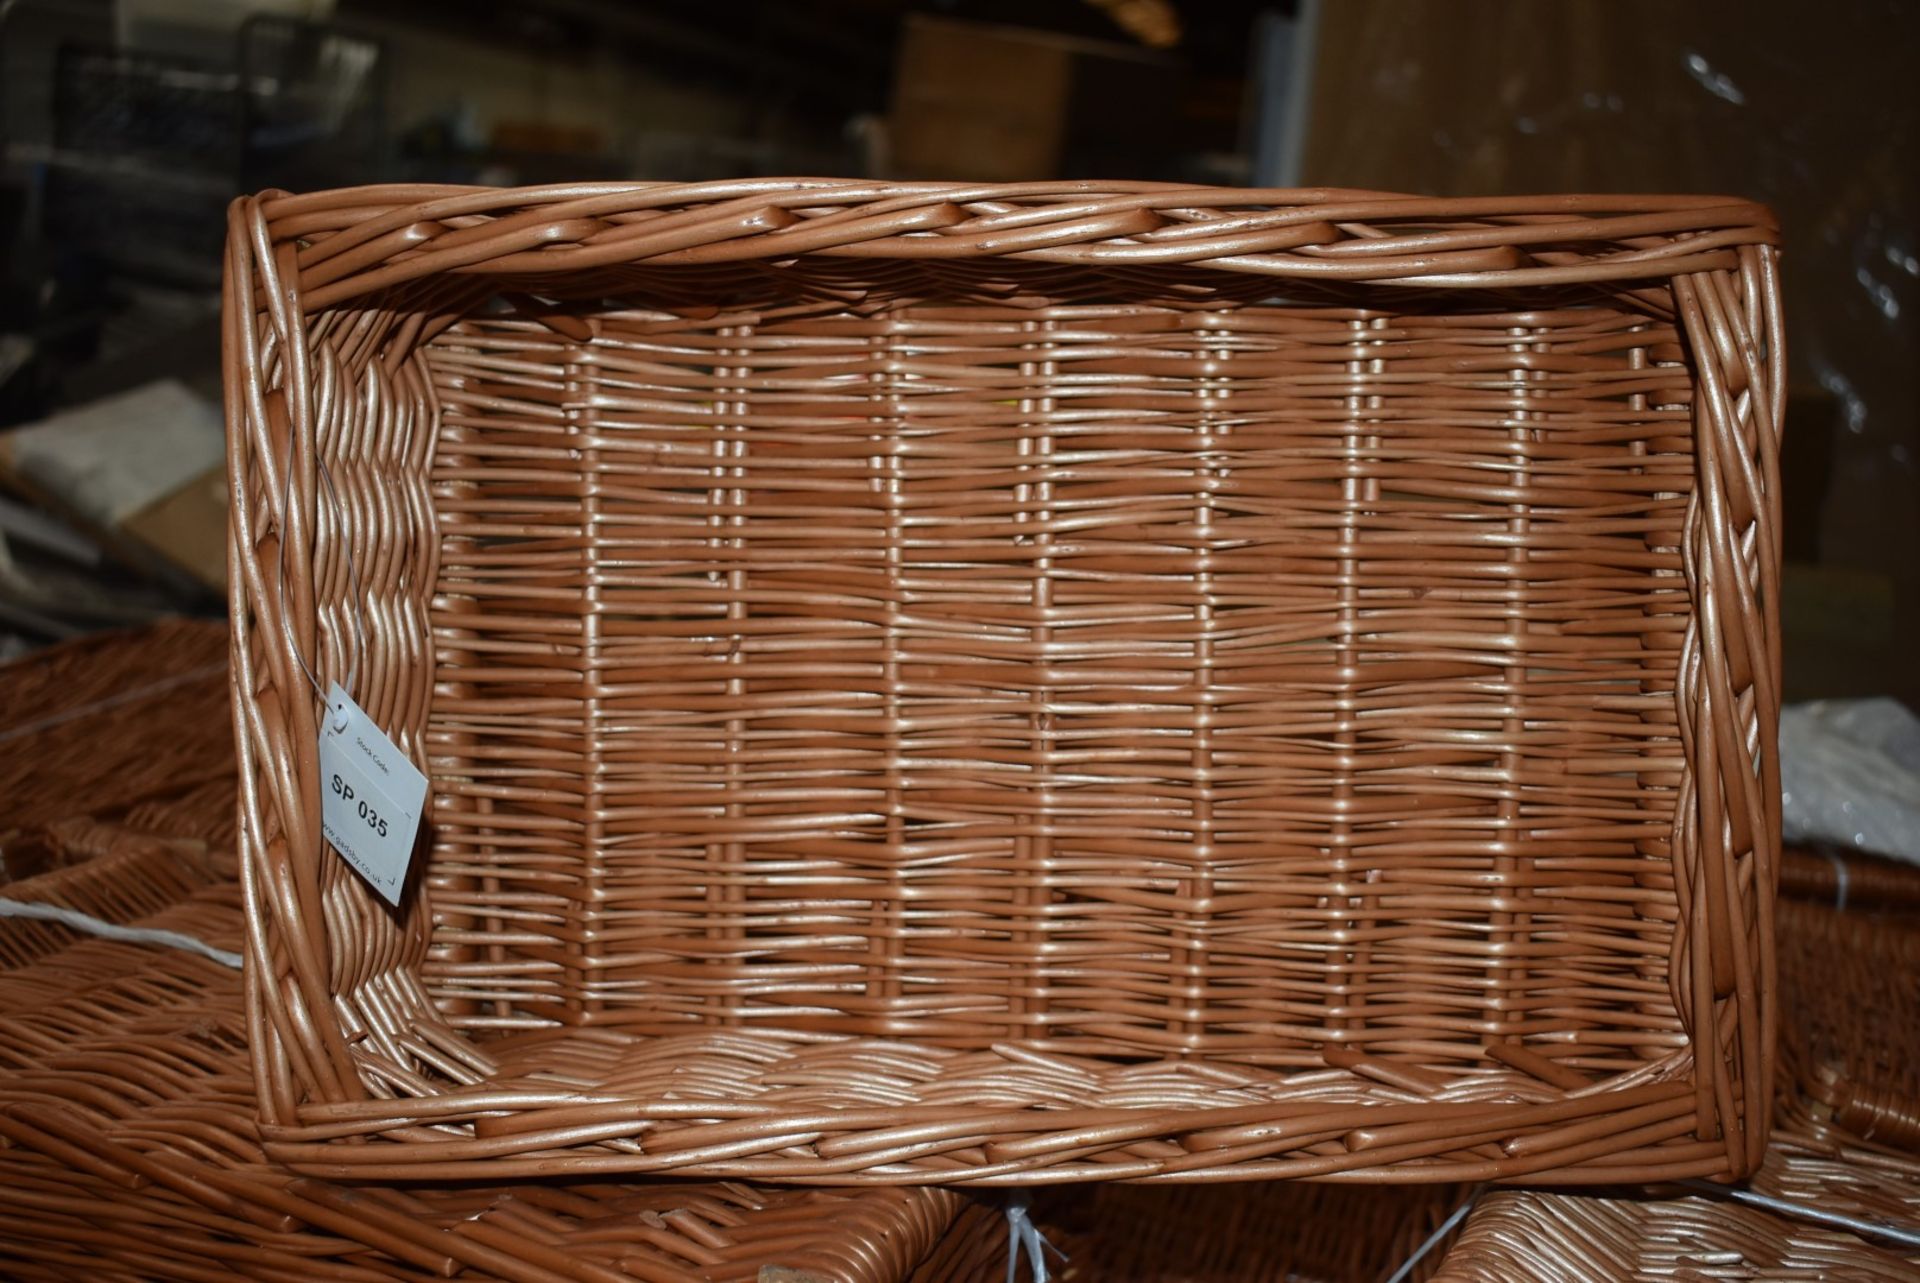 4 x Hand Woven Retail Display Sloping Wicker Baskets - Ideal For Presentation in Wide Range of - Image 2 of 10